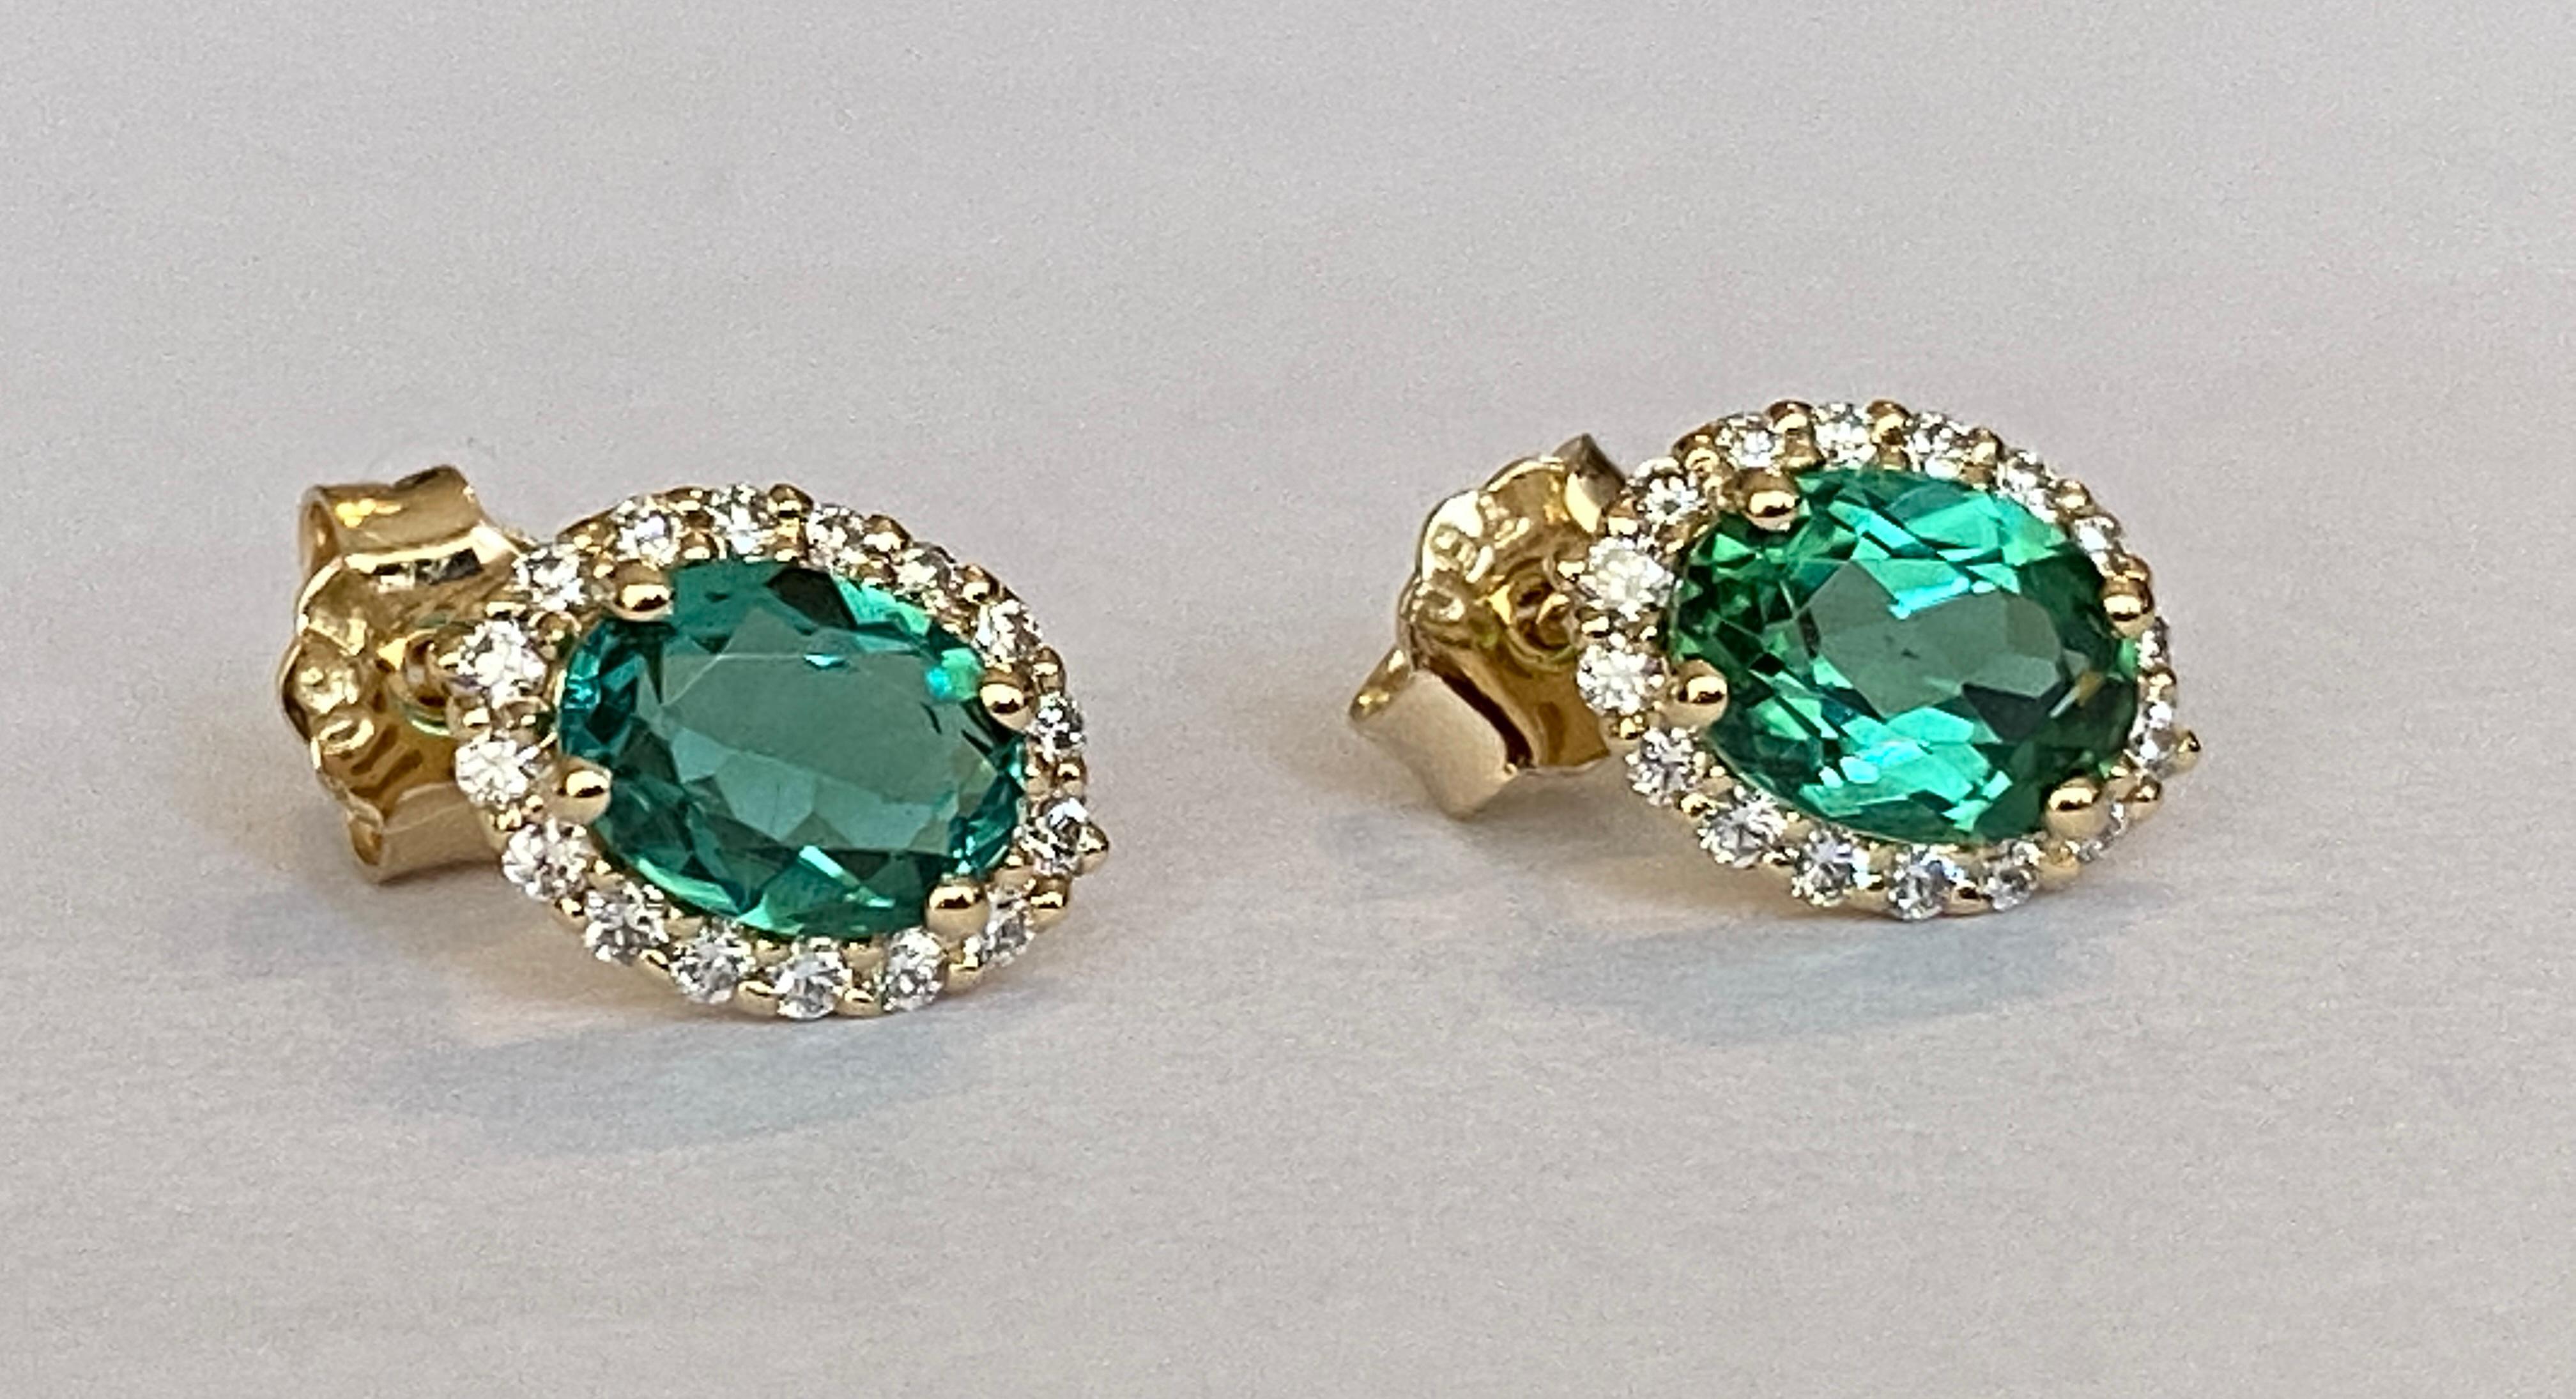 Oval Cut 18 kt yellow gold Diamond earrings studs with Green Tourmaline For Sale